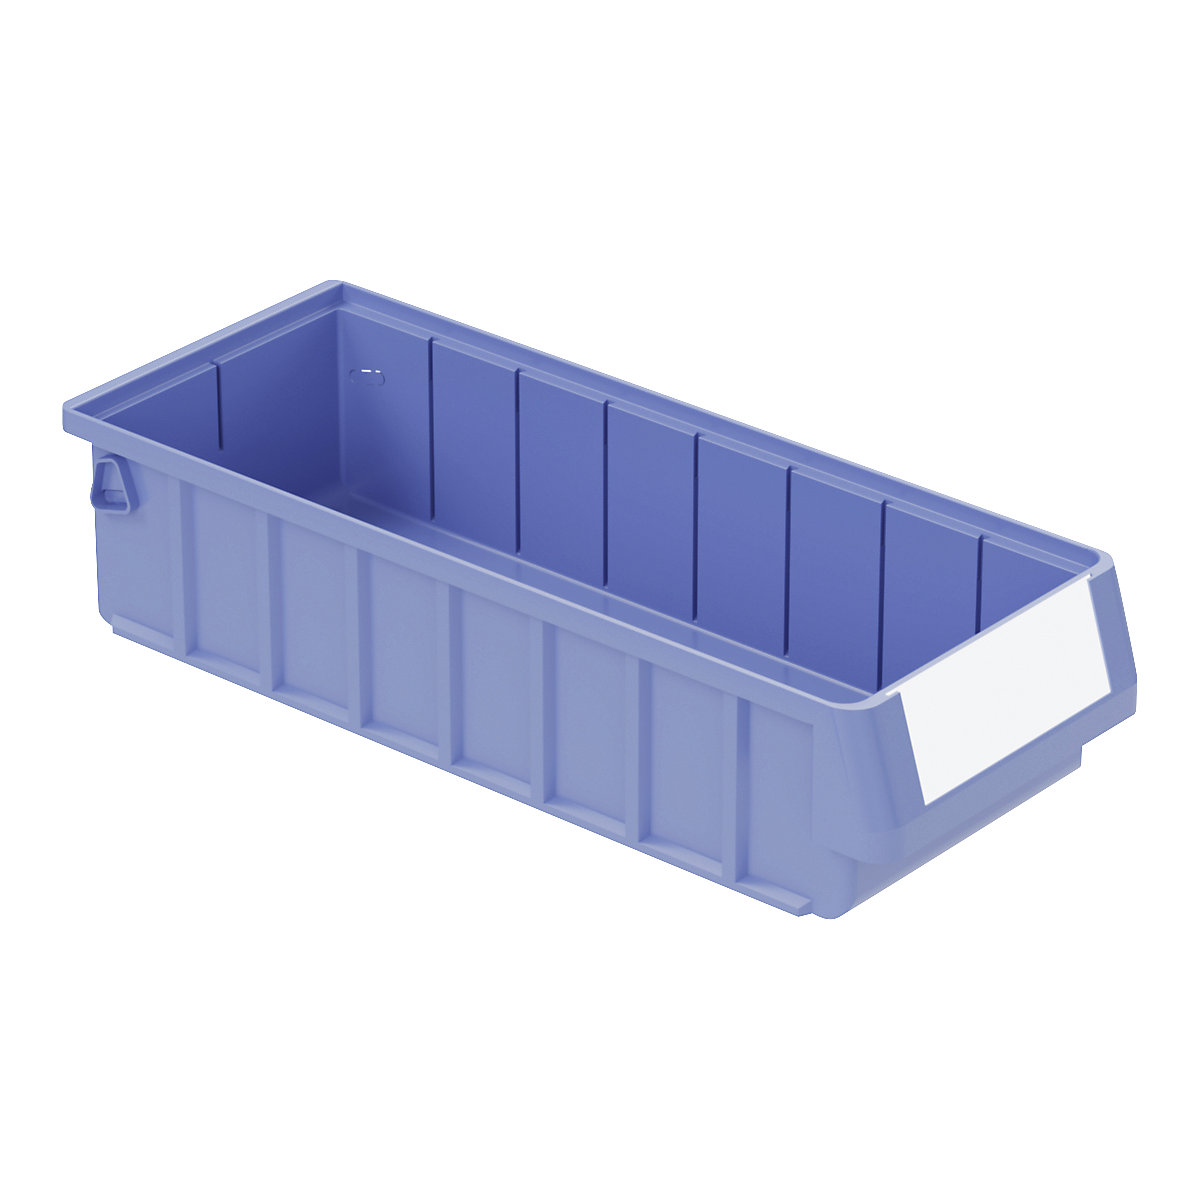 Shelf bin – BITO, made of PP, LxWxH 400 x 156 x 90 mm, pack of 12-2